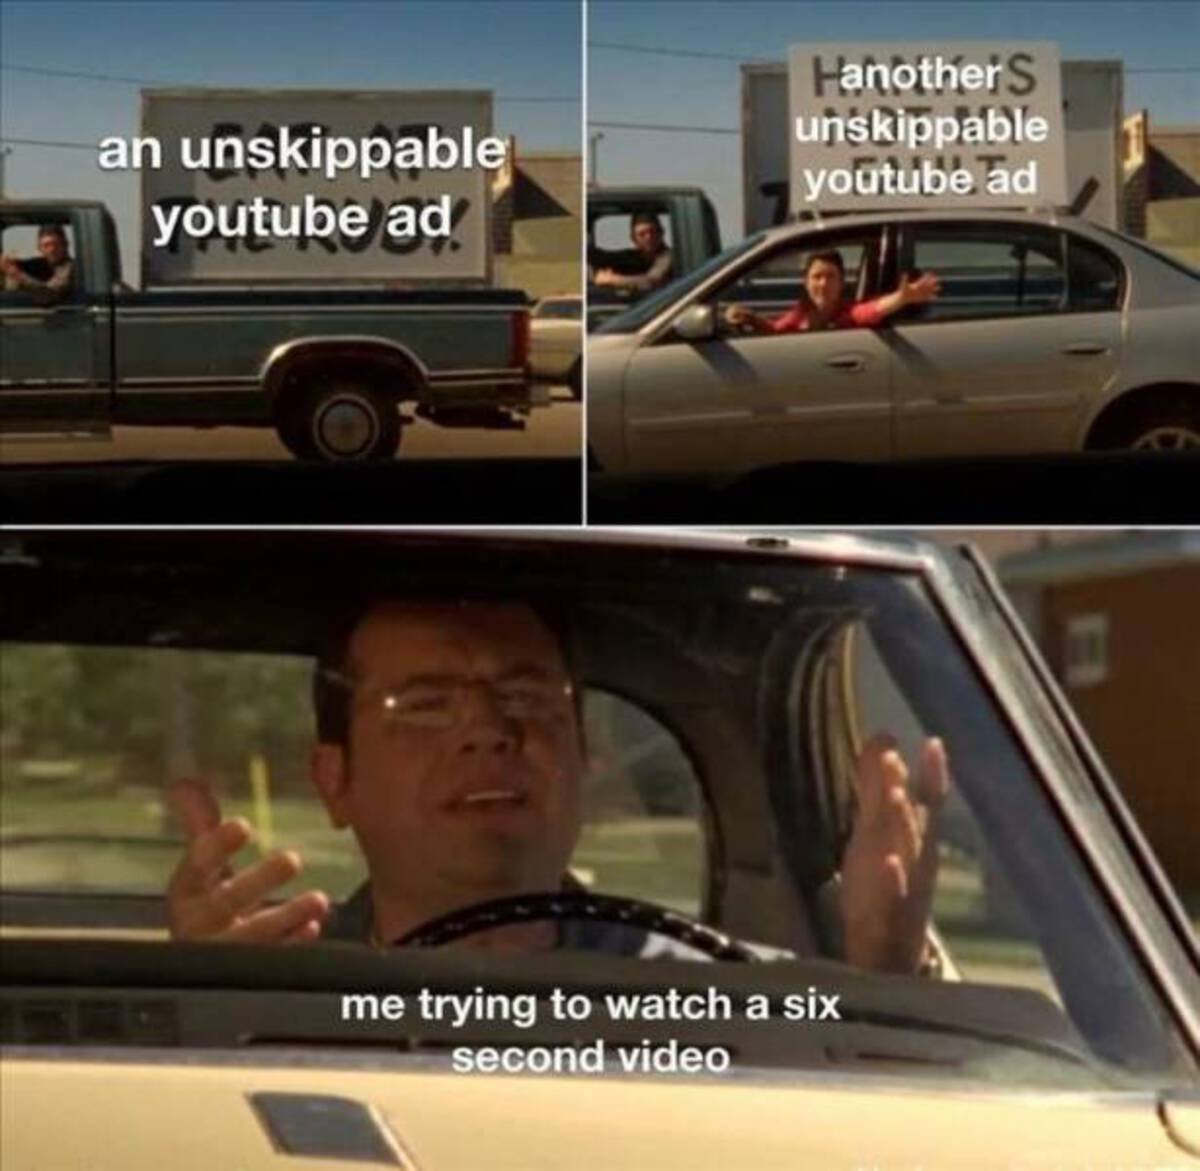 Funny meme - an unskippable youtube ad Hanother S unskippable youtube ad trying to watch a six second video